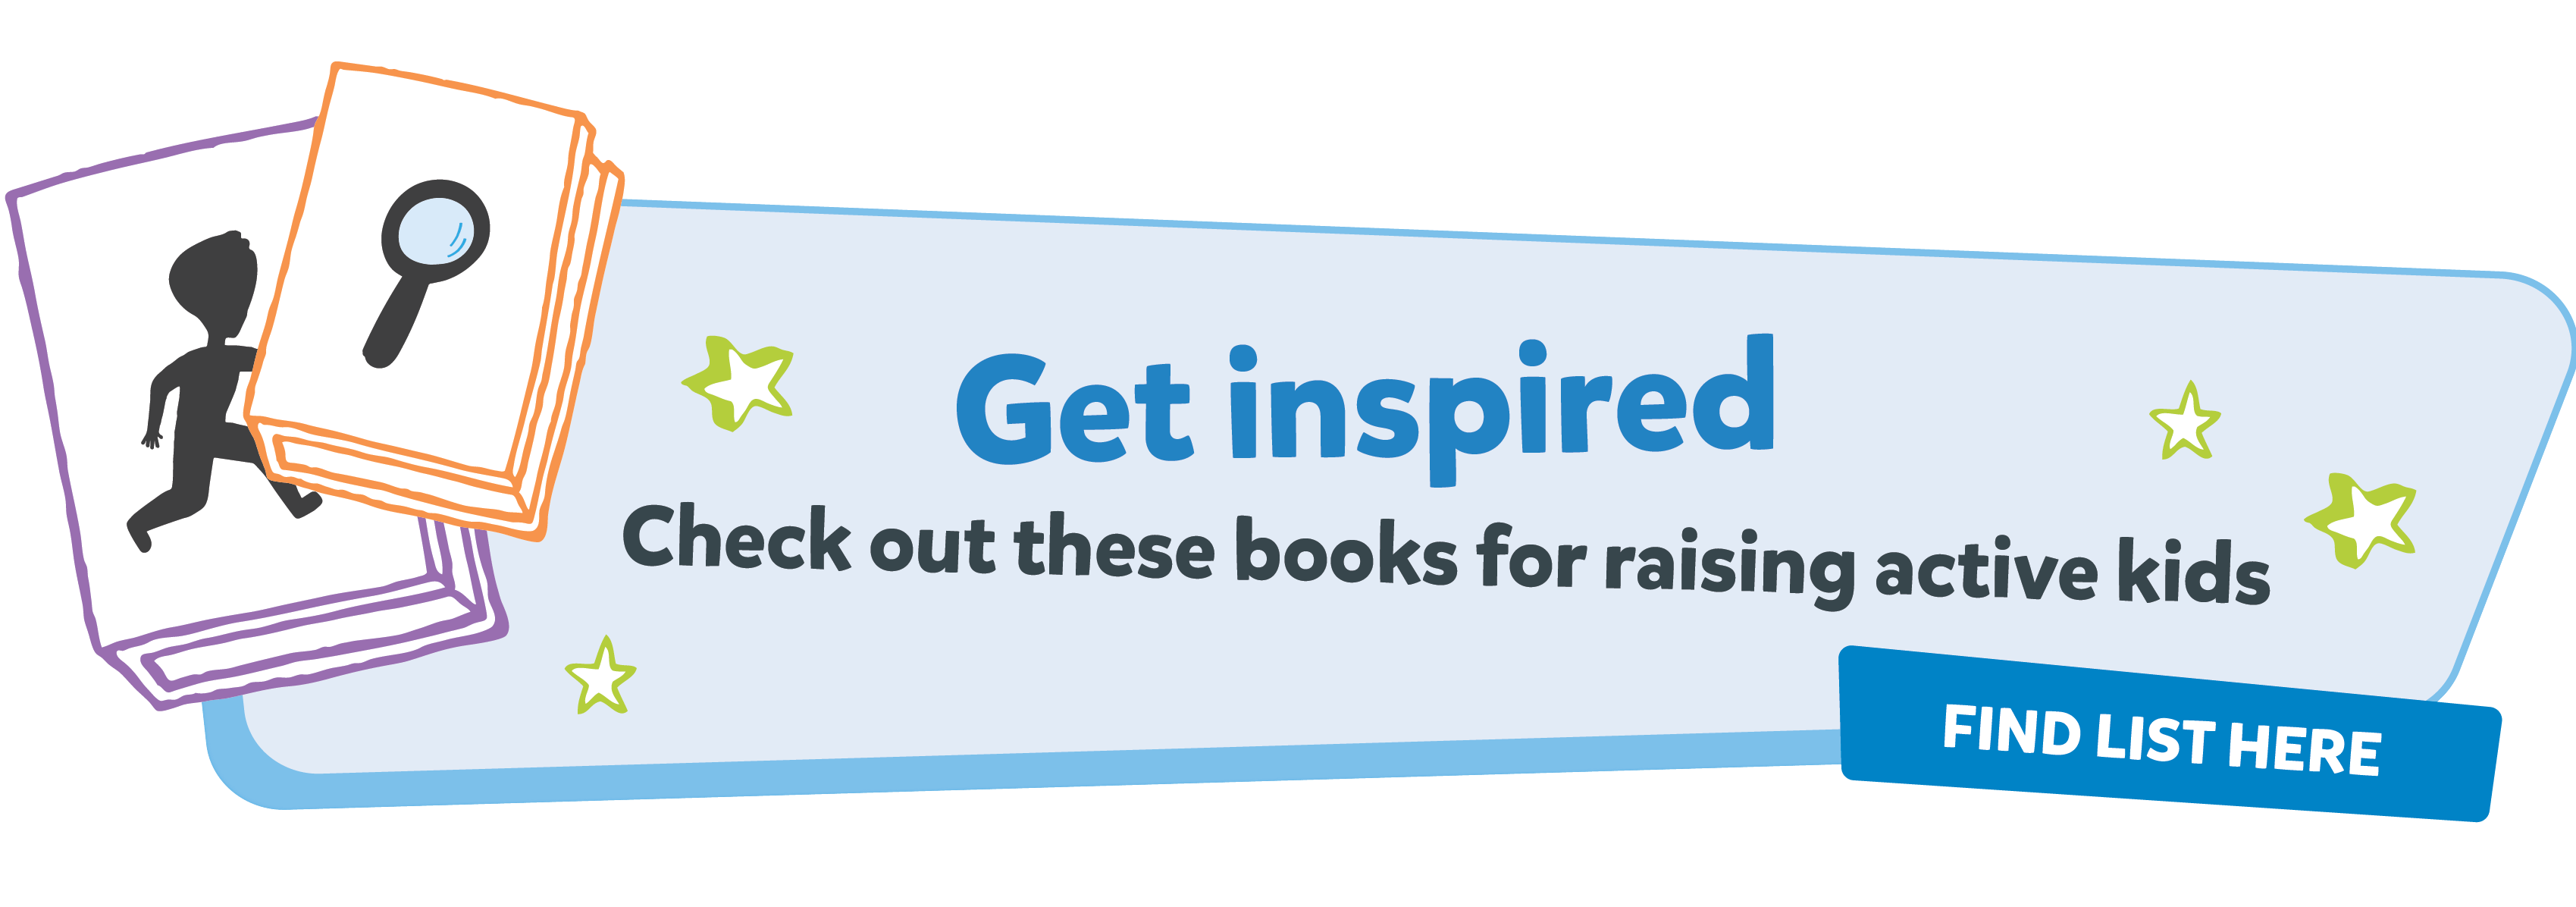 Get Inspired - Check out these books to raise active kids - Find List Here